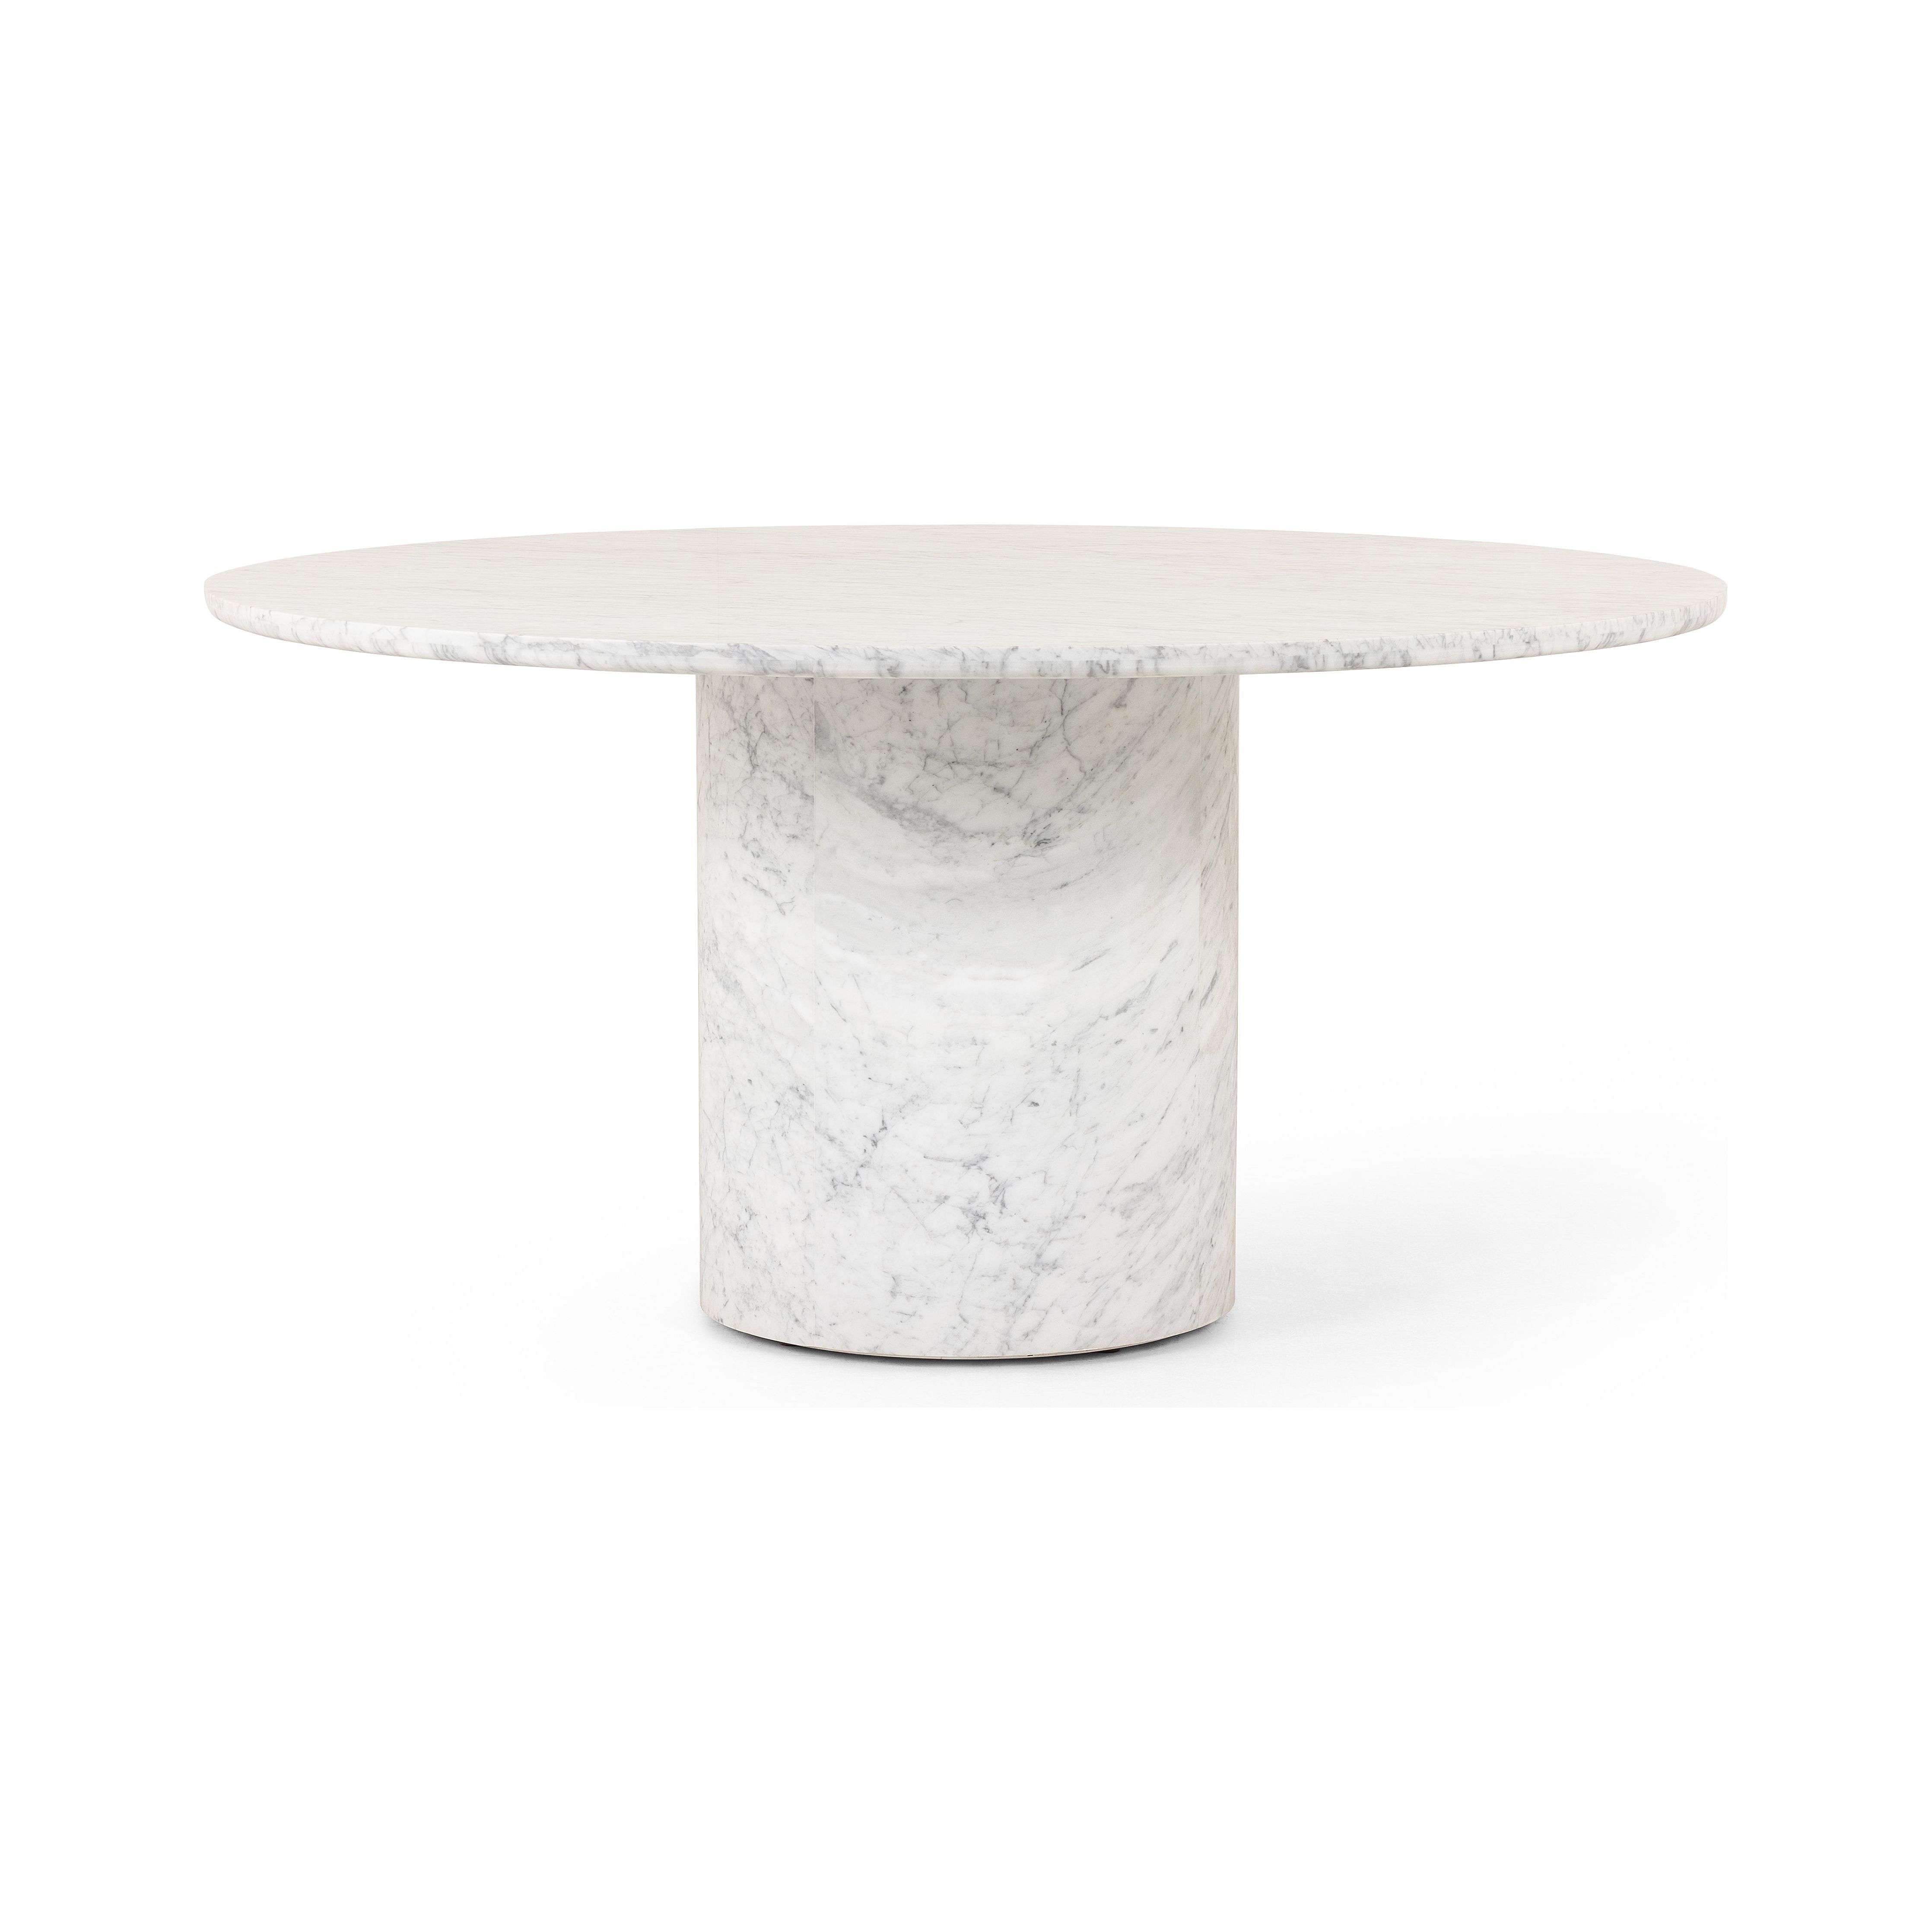 A statement in marble, this dining table showcases a simple cylinder base with a round table top. Style in a dining room or entryway. Seats six comfortably. Amethyst Home provides interior design, new construction, custom furniture, and area rugs in the Winter Garden metro area.